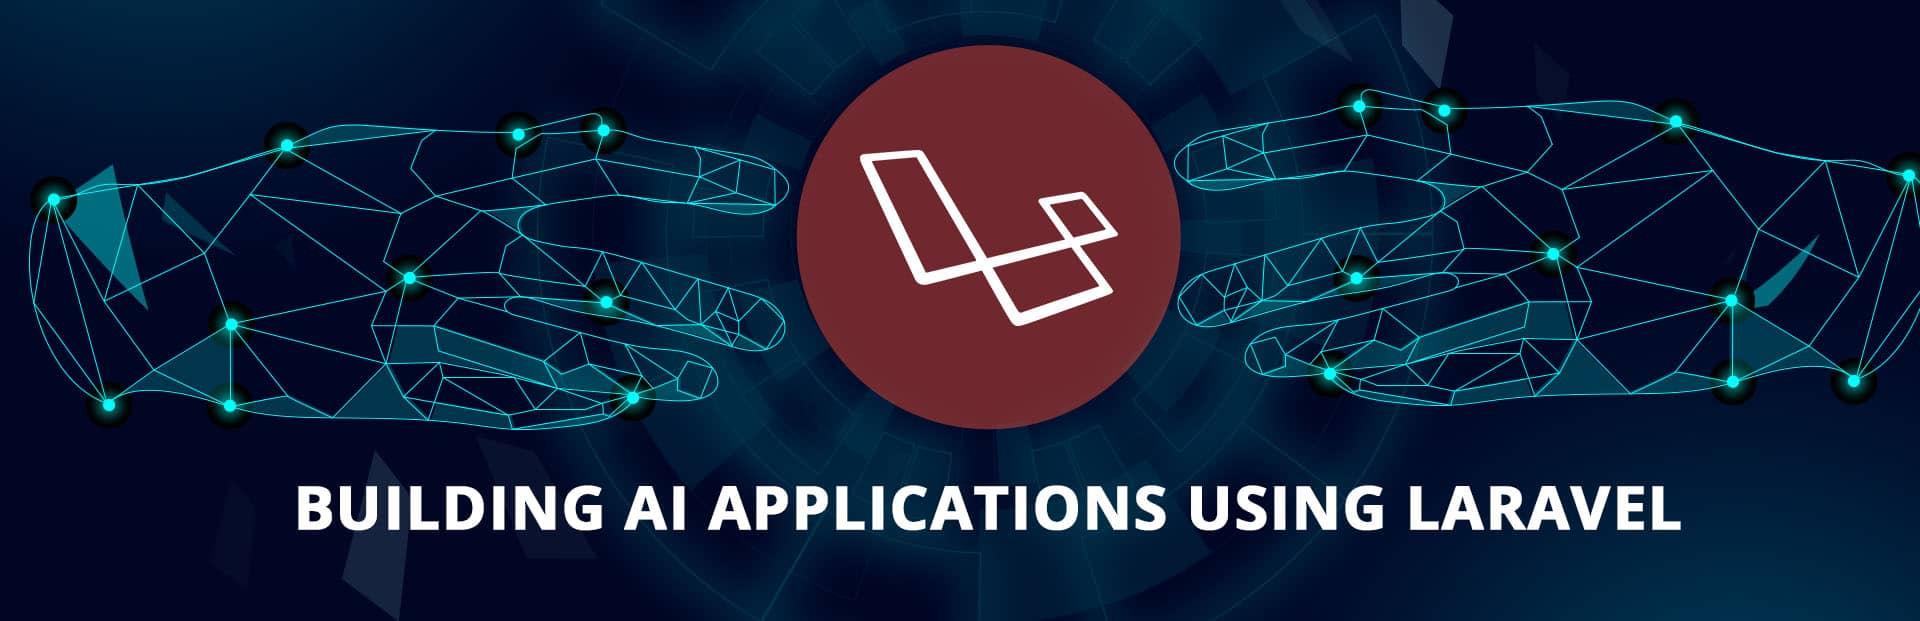 How to build AI applications using Laravel?